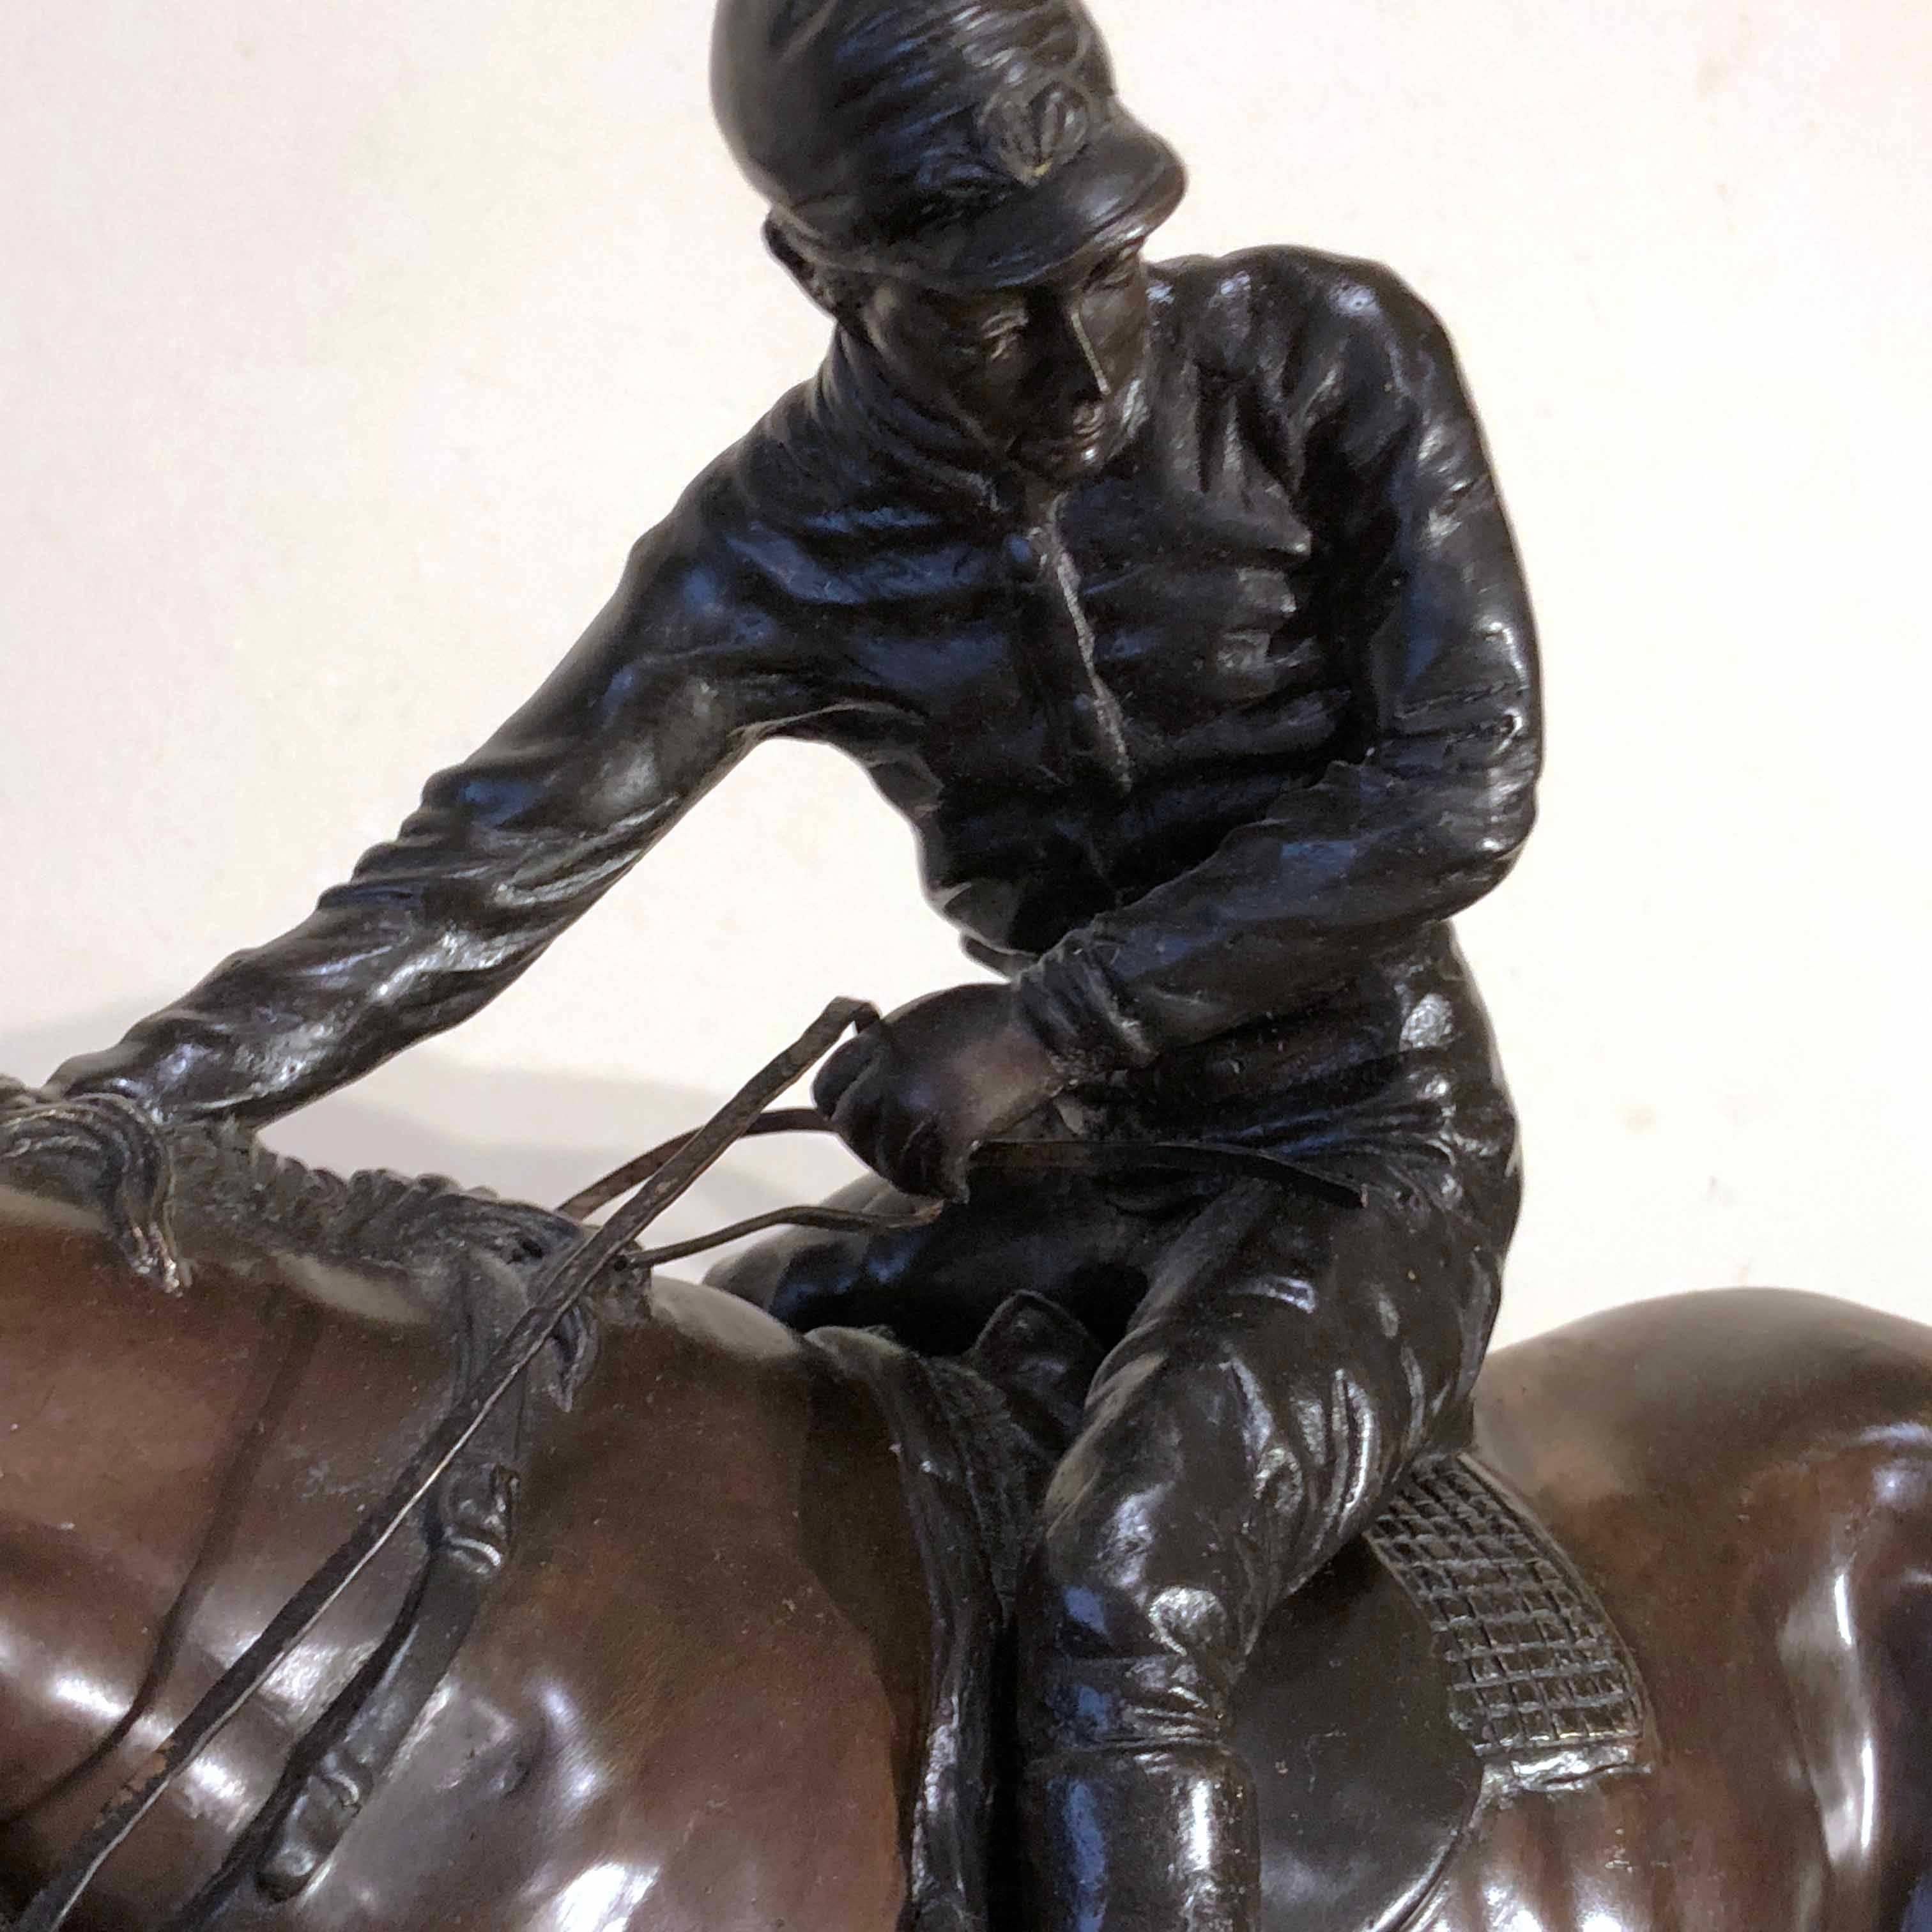 Jockey bronze sculpture attributed (with documentation) to J. Bonheur, French artist (1827-1901). Both the horse and the Jockey are represented in a very realistic way. This piece is characterized by great quality of the bronze and Fine attention to